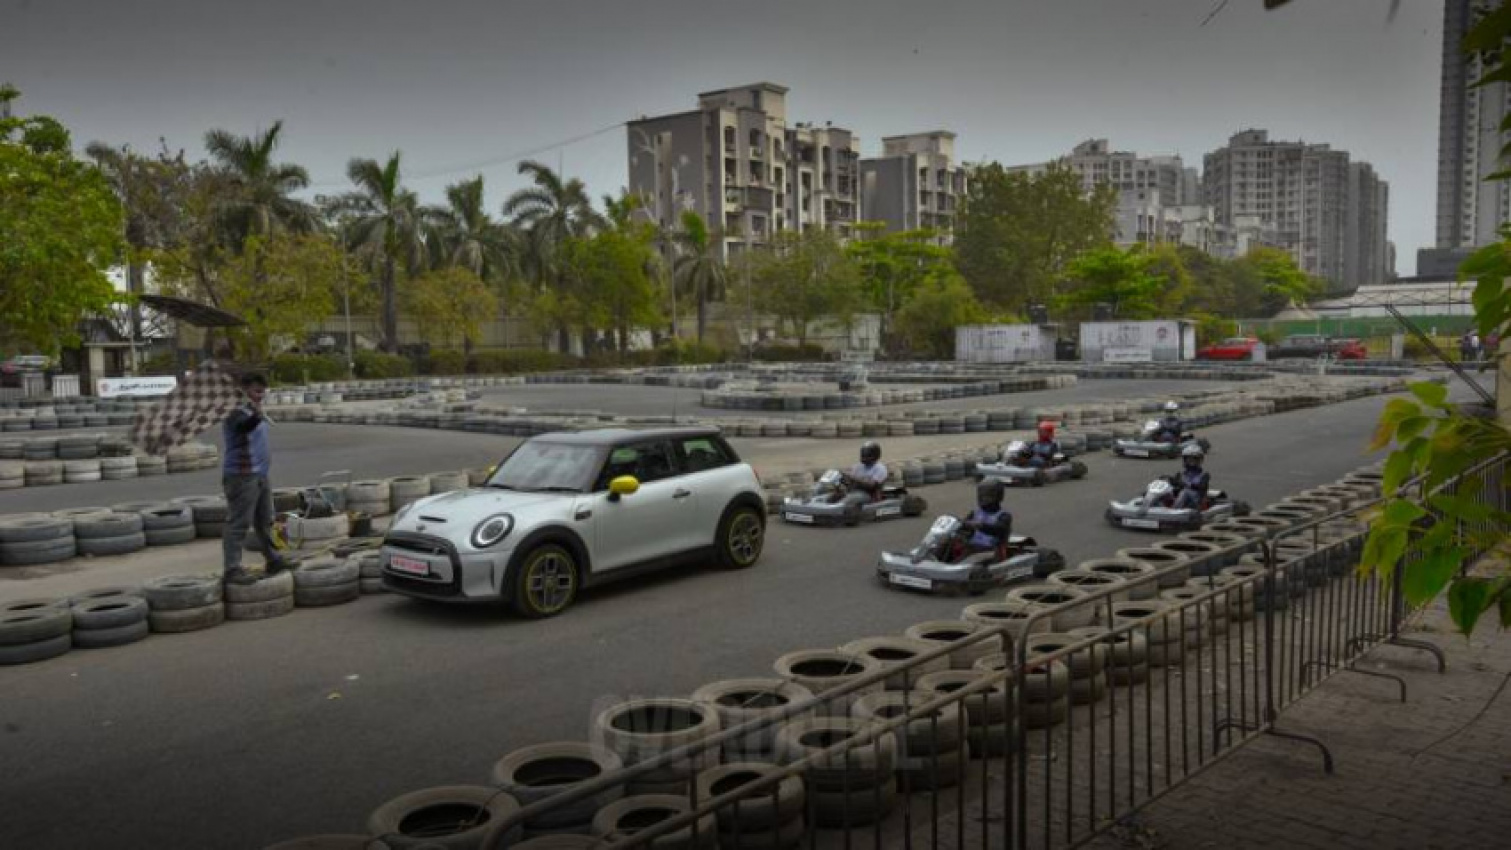 autos, cars, features, mini, 2022 mini electric review india, android, electric vehicles in india, mini car, mini cooper, mini cooper electric, mini cooper electric price india 2022, mini cooper electric real world range, mini cooper electric review, mini cooper electric review india 2022, mini cooper se electric, mini cooper se electric road test review, mini cooper se india, mini cooper see 2022, mini electric, mini electric 2022, mini electric car, mini electric car 0 to 100, mini electric car interiors, mini electric car price in india, mini electric car price india 2022, mini electric car range, mini electric price, mini electric range km, mini electric review, mini electric review 2022, mini india, overdrive, android, 2022 mini cooper electric review, road test